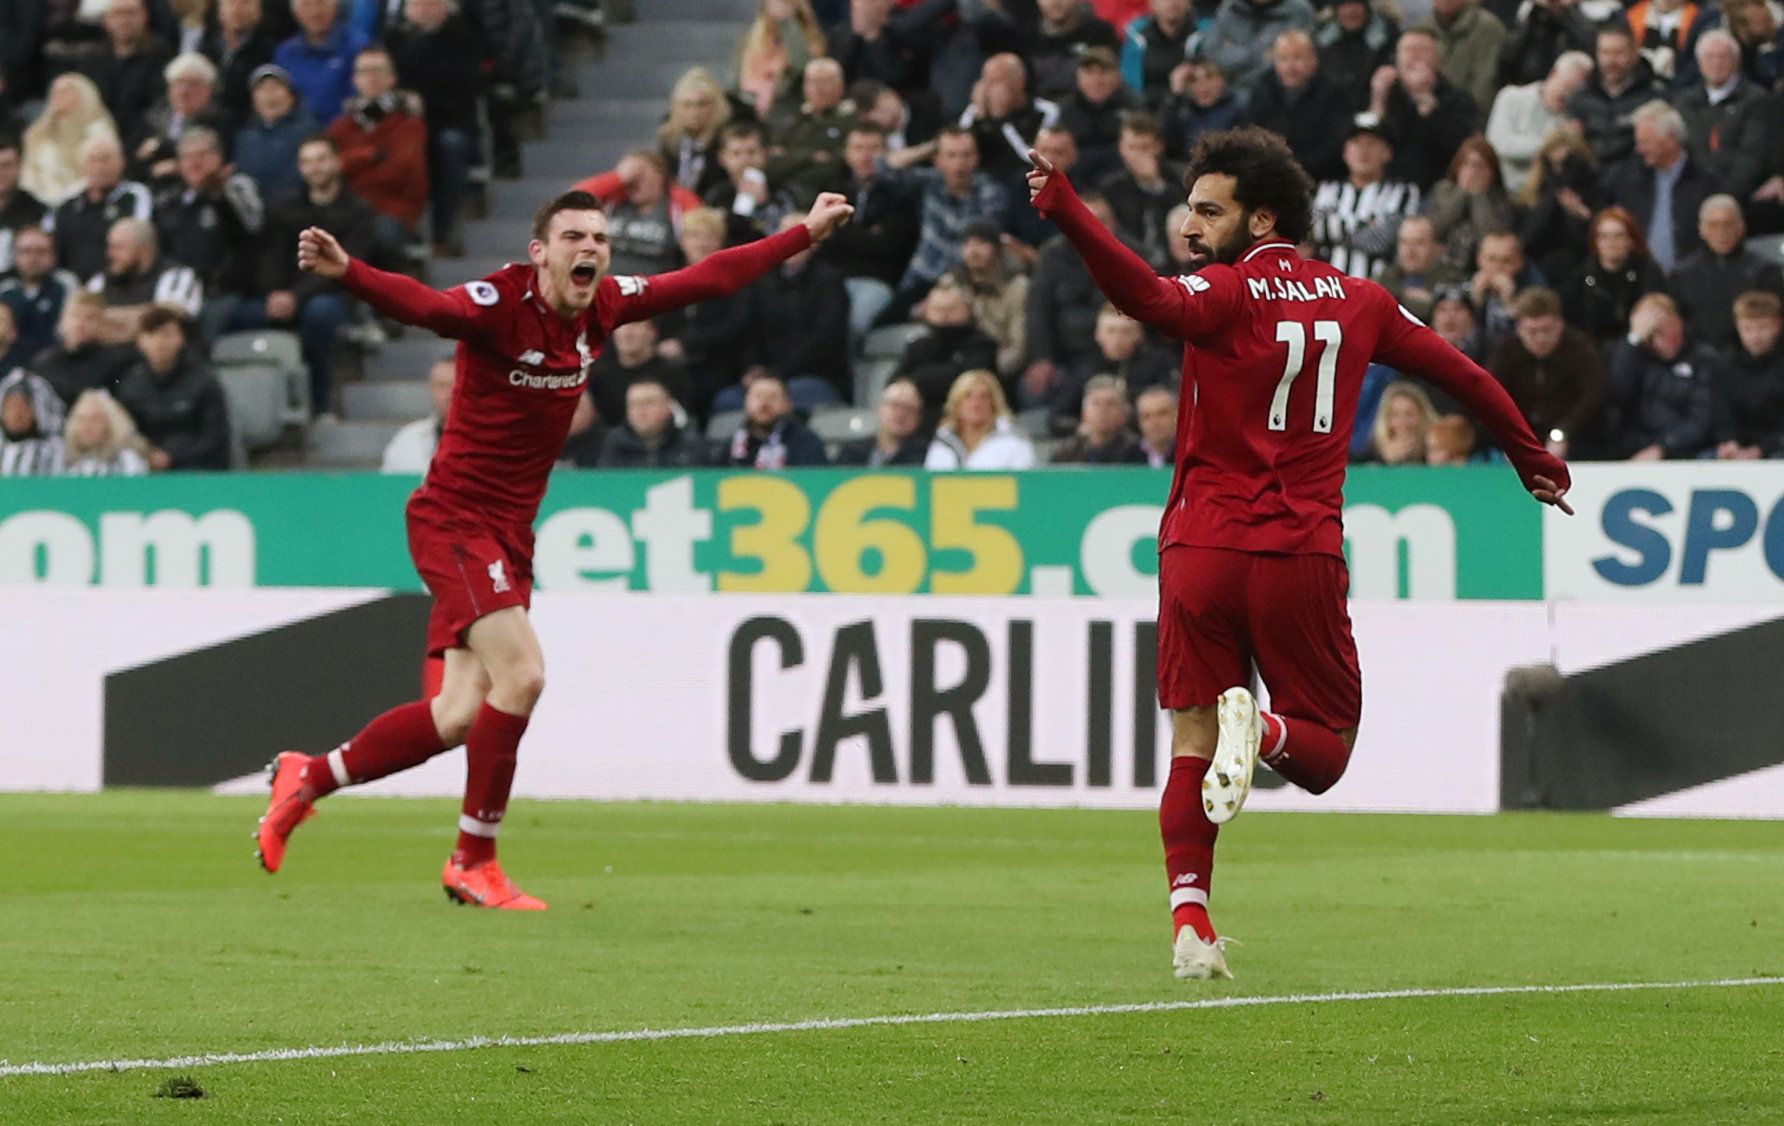 Soccer Football - Premier League - Newcastle United v Liverpool - St James' Park, Newcastle, Britain - May 4, 2019   Liverpool's Mohamed Salah celebrates scoring their second goal with Andrew Robertson    Action Images via Reuters/Lee Smith    EDITORIAL USE ONLY. No use with unauthorized audio, video, data, fixture lists, club/league logos or 